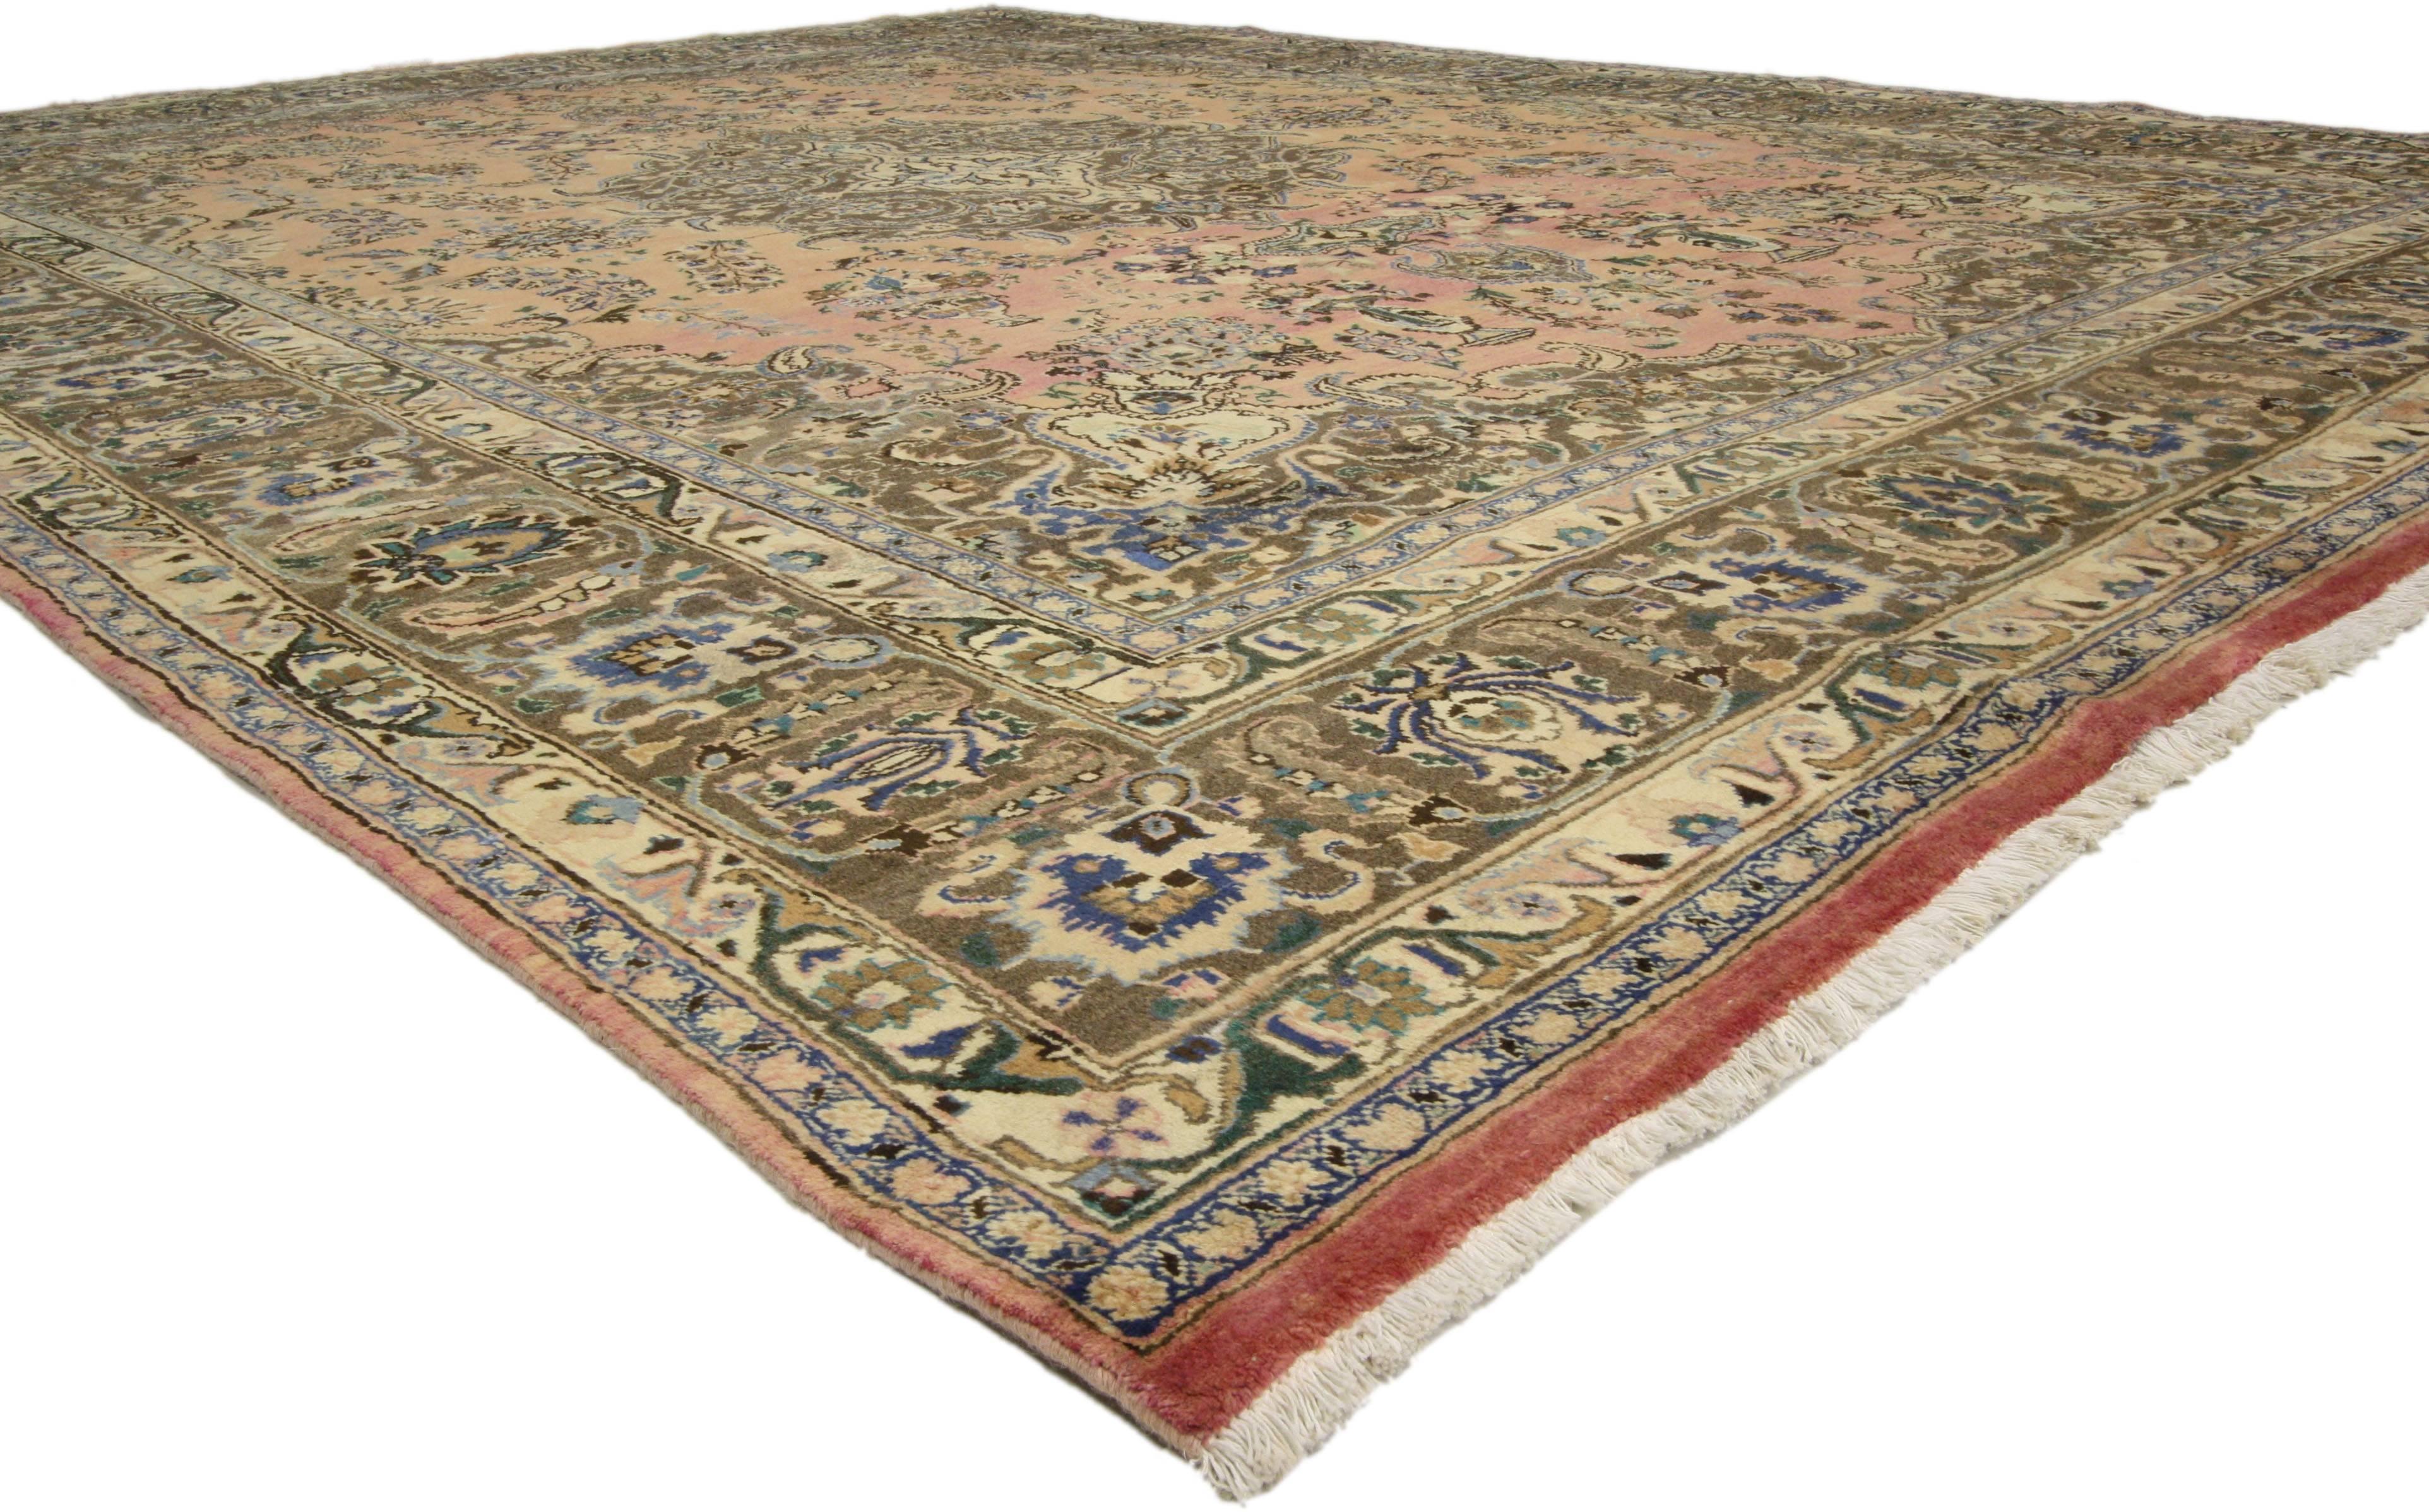 76411 Vintage Khorassan Persian Rug with Traditional Style 09'08 x 13'00. Vintage Khorassan Persian rug featuring an ornate center medallion and geometric motifs in an abrashed field. The intricate border creates a sense of balance with the